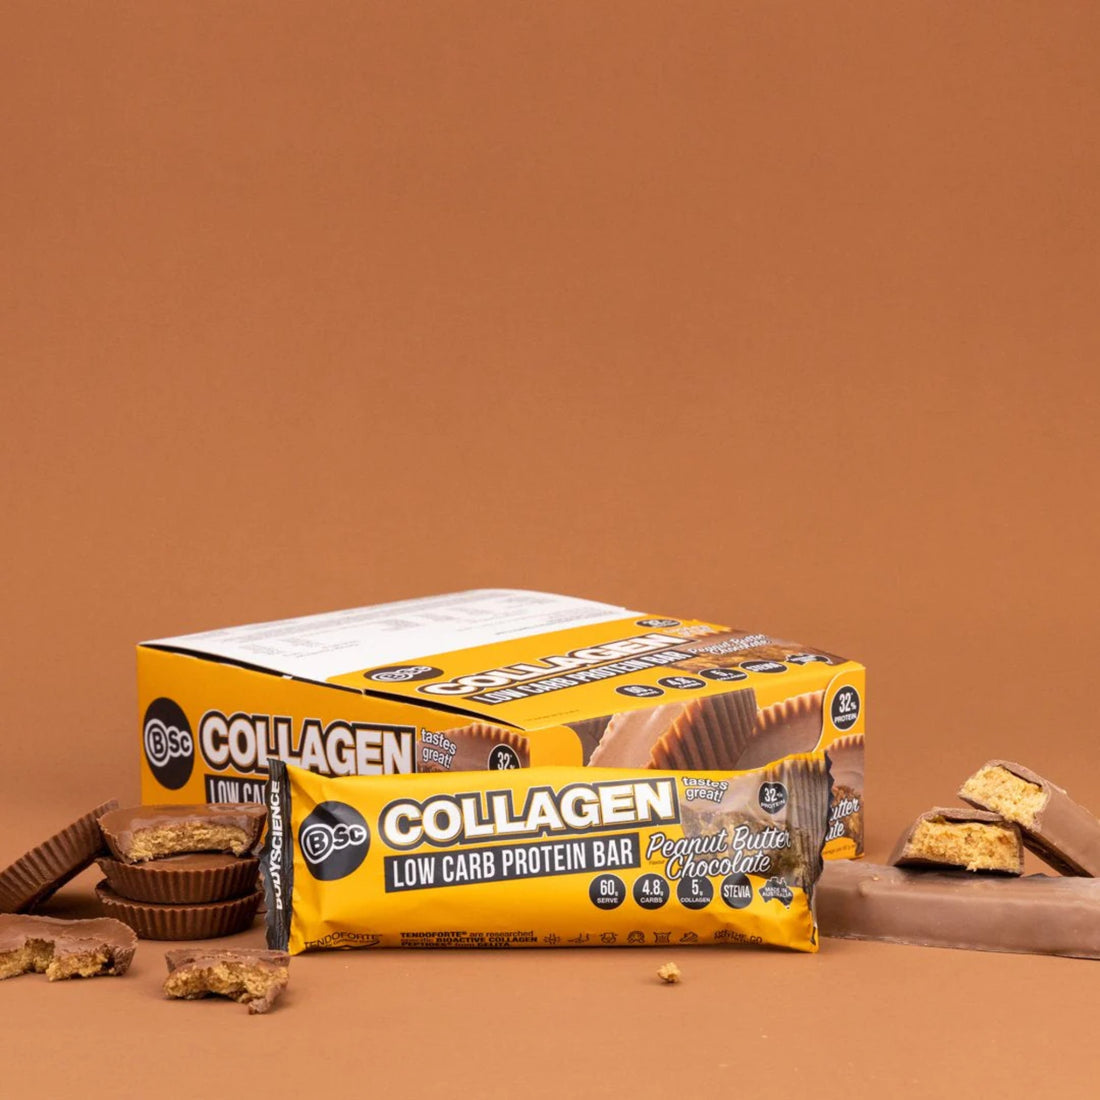 BSC Collagen Low Carb Protein Bar - Lifestyle